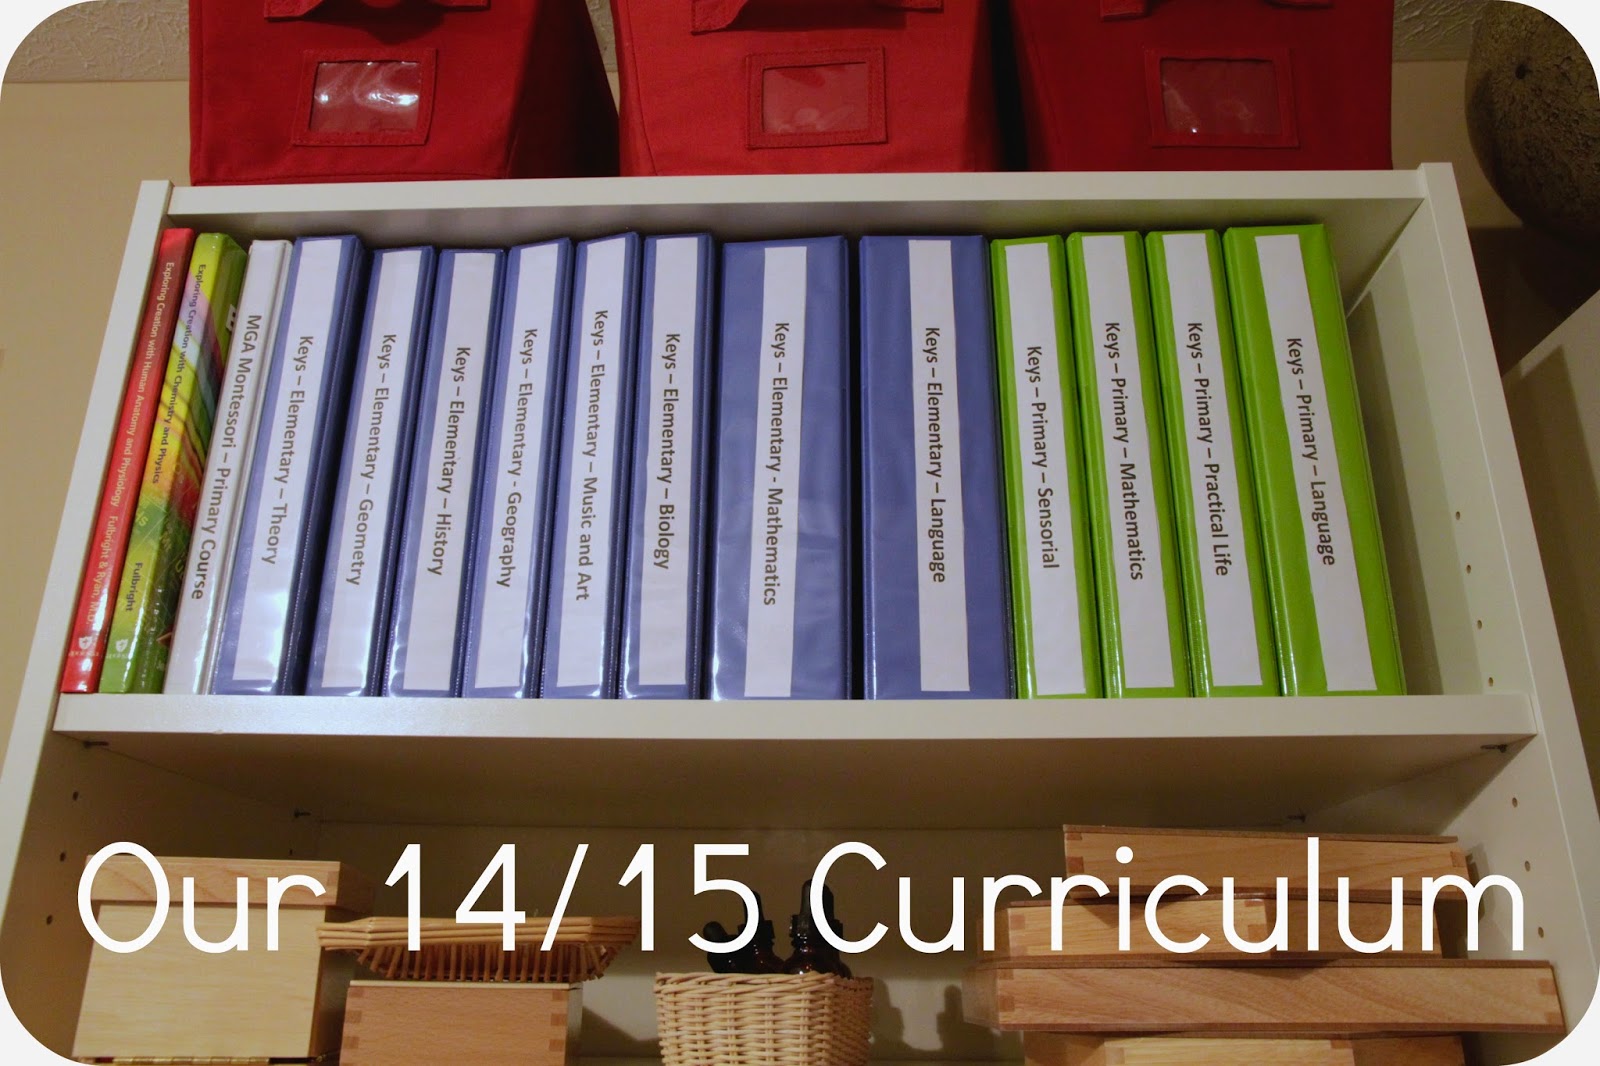 The Overdue 14/15 Curriculum Post